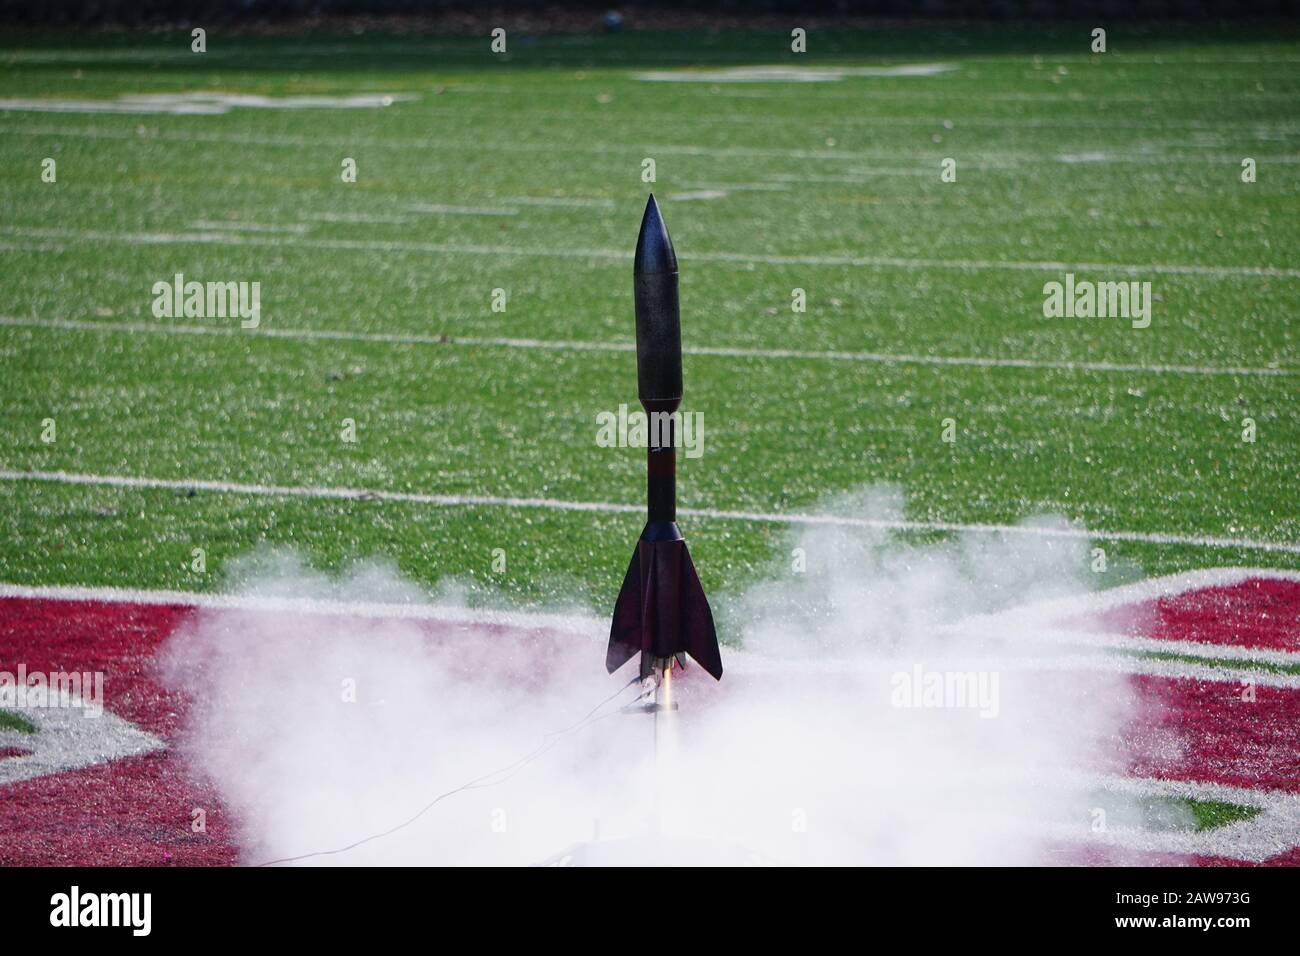 rocket launch experiment made by students Stock Photo